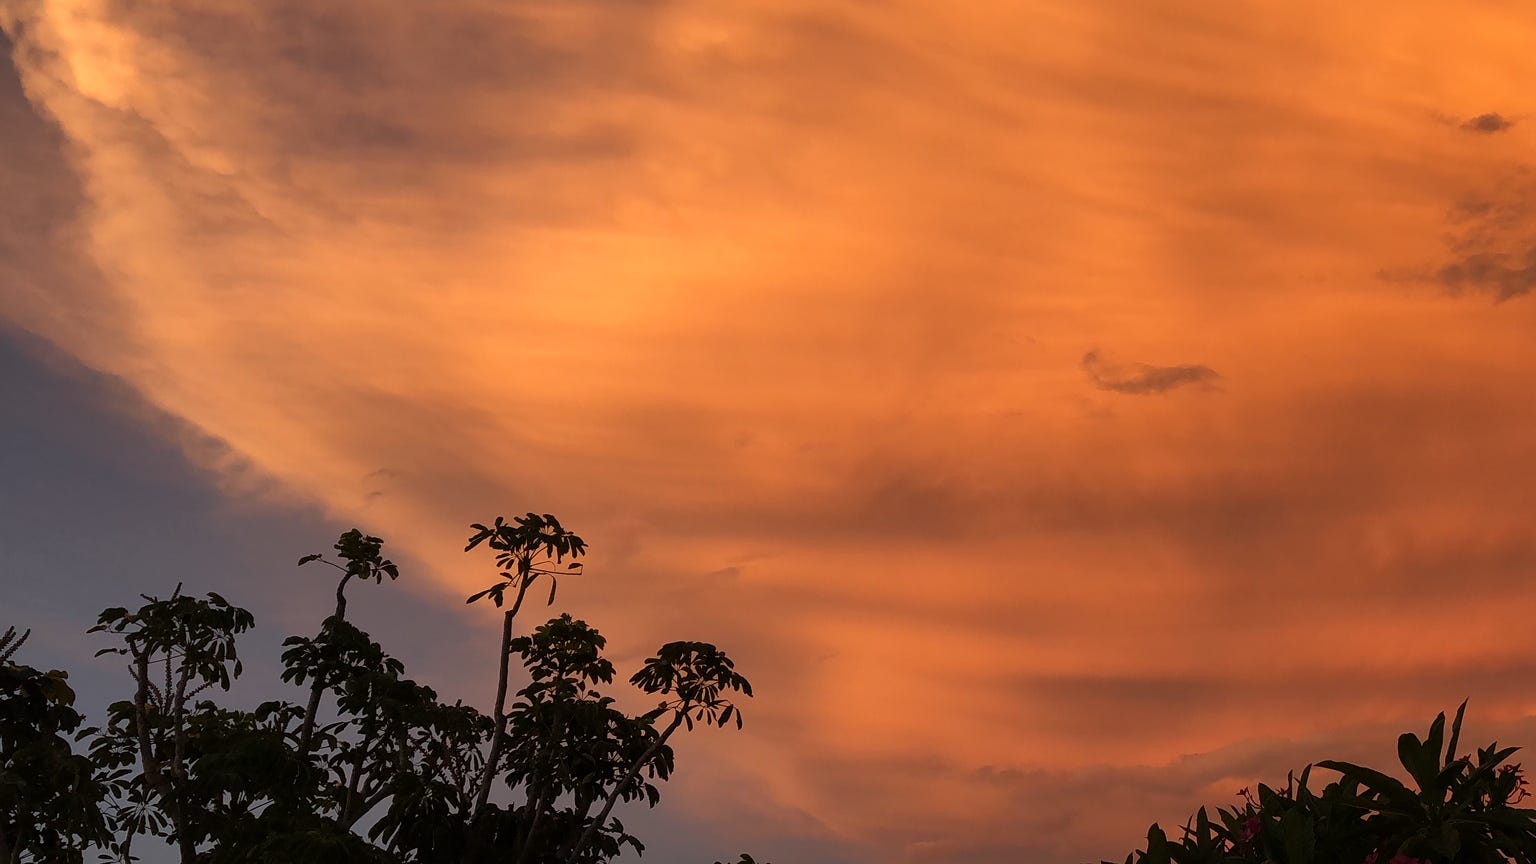 Saharan dust clouds reach Florida and the Atlantic Coast. What is it?